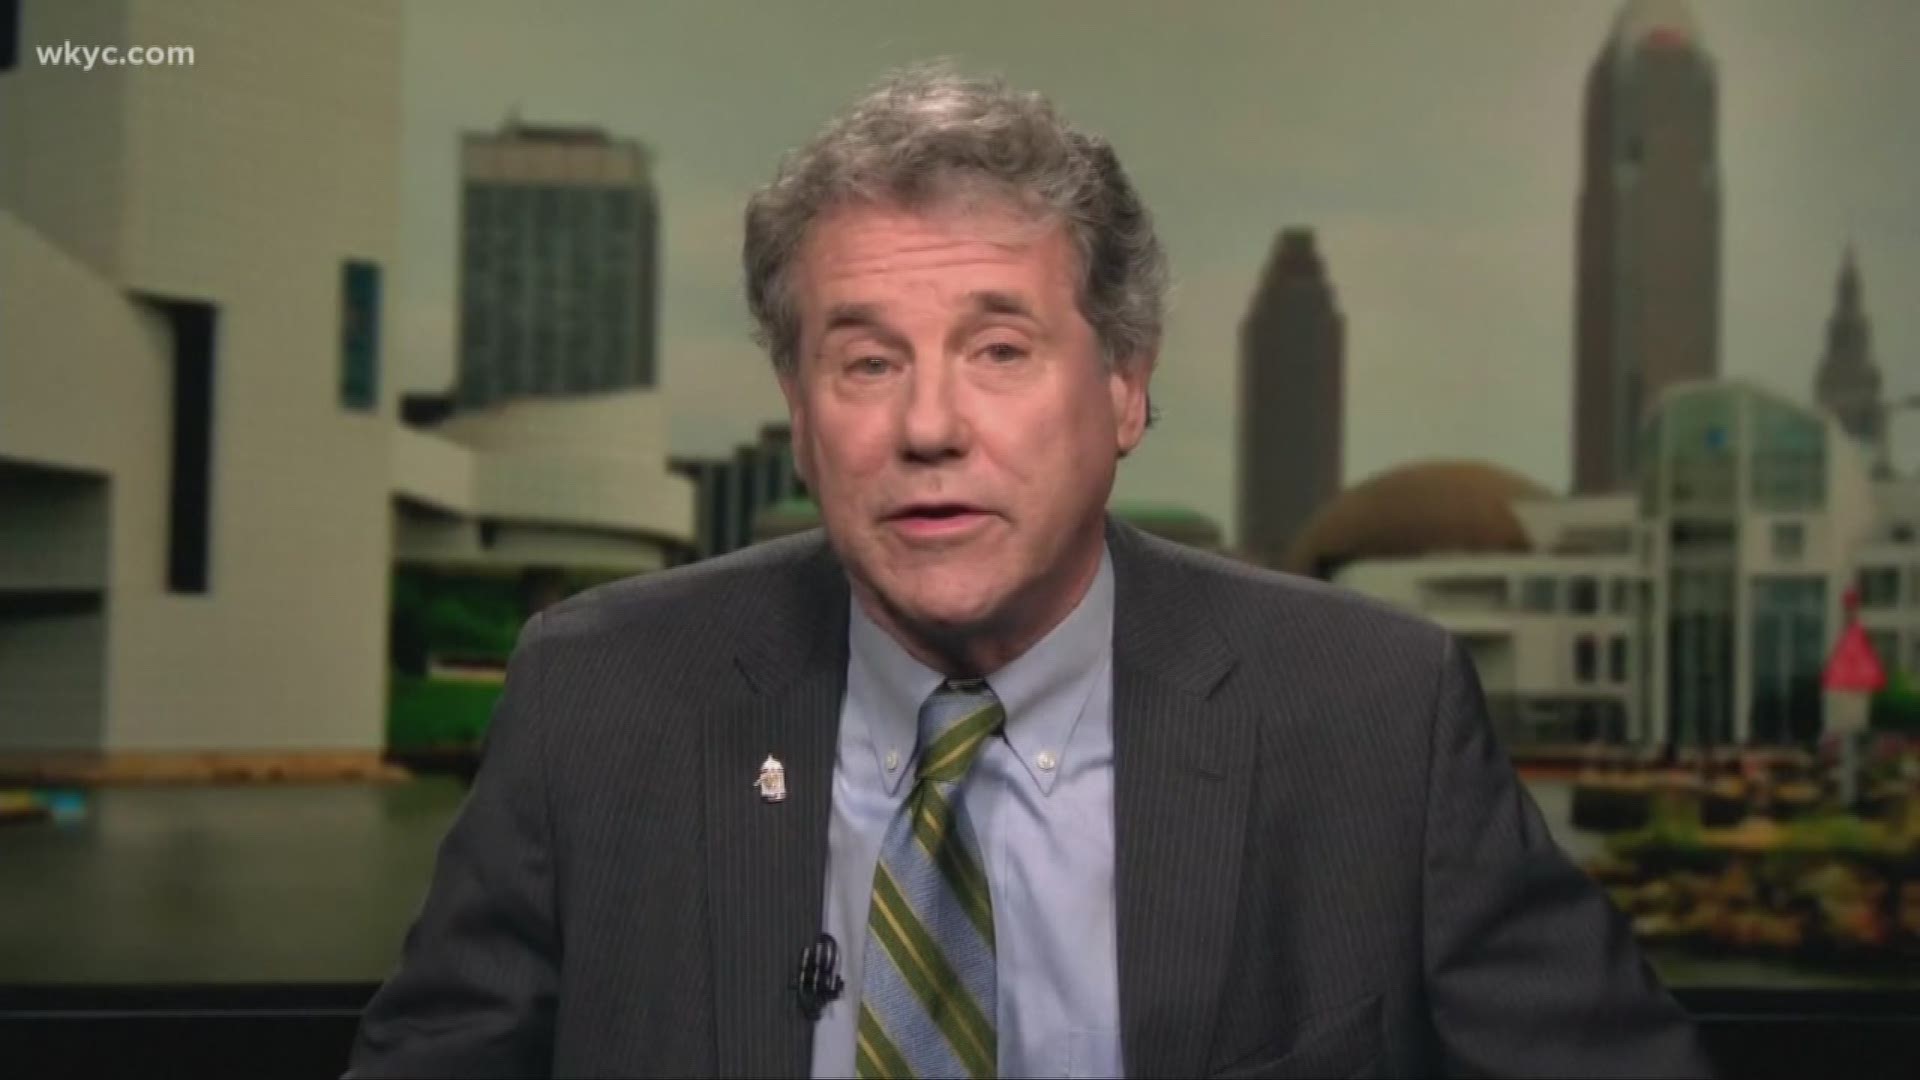 Sherrod Brown could be eyeing the White House